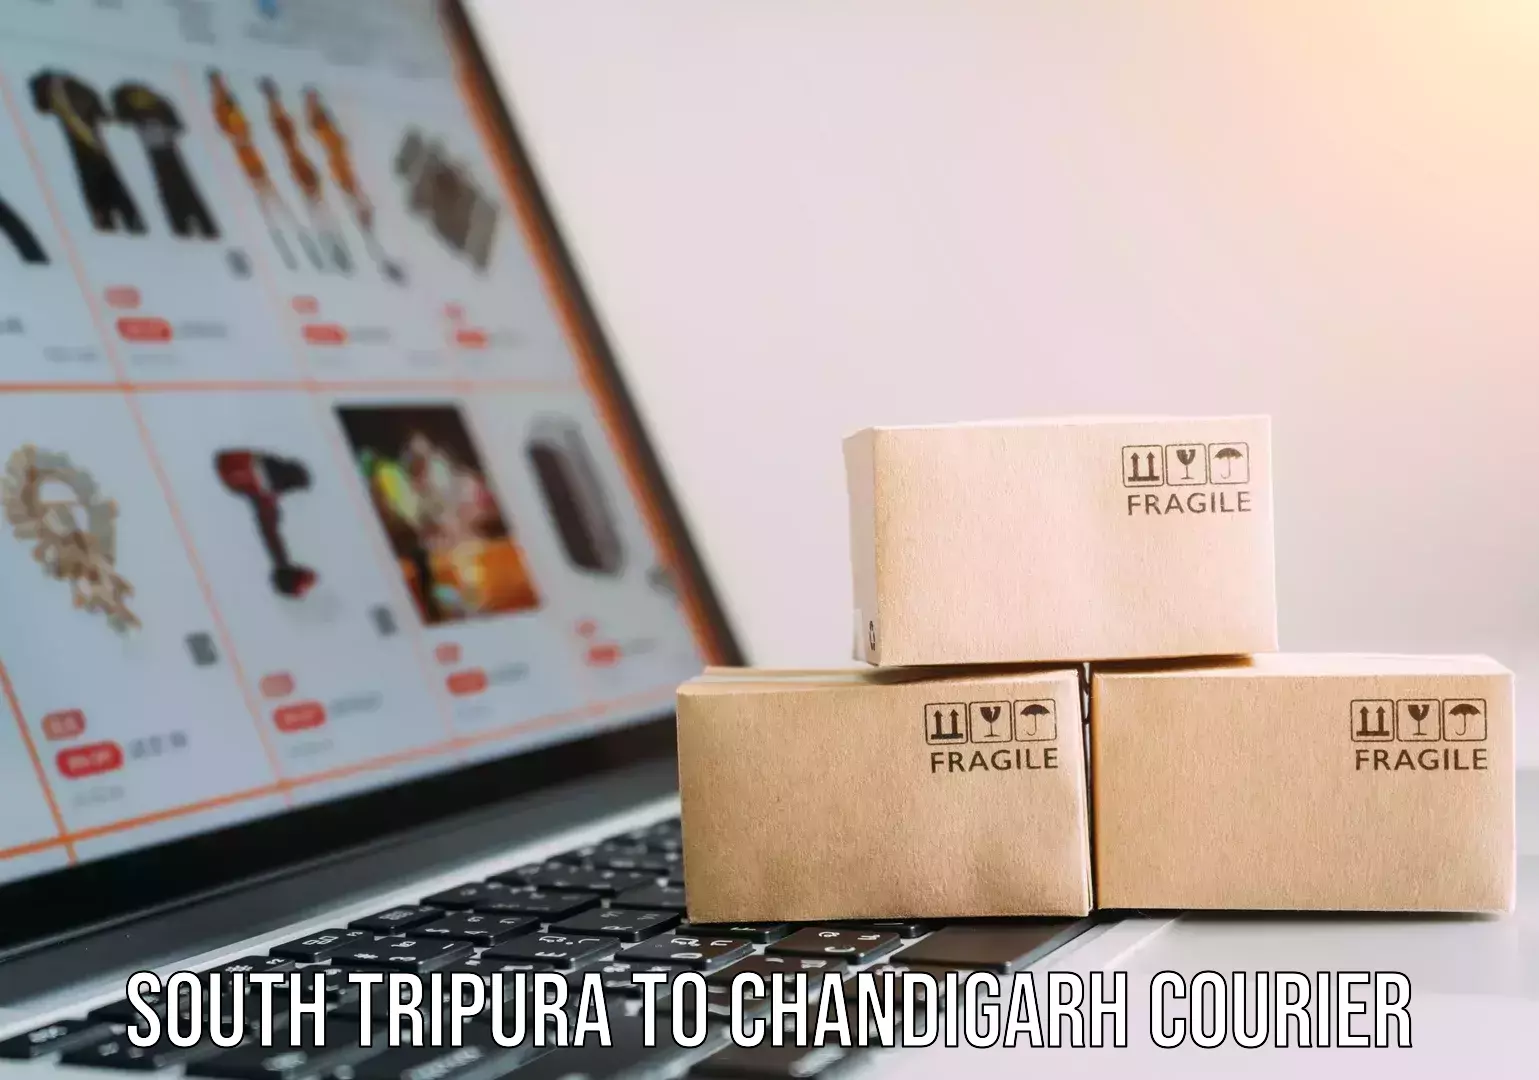 Personal courier services South Tripura to Chandigarh